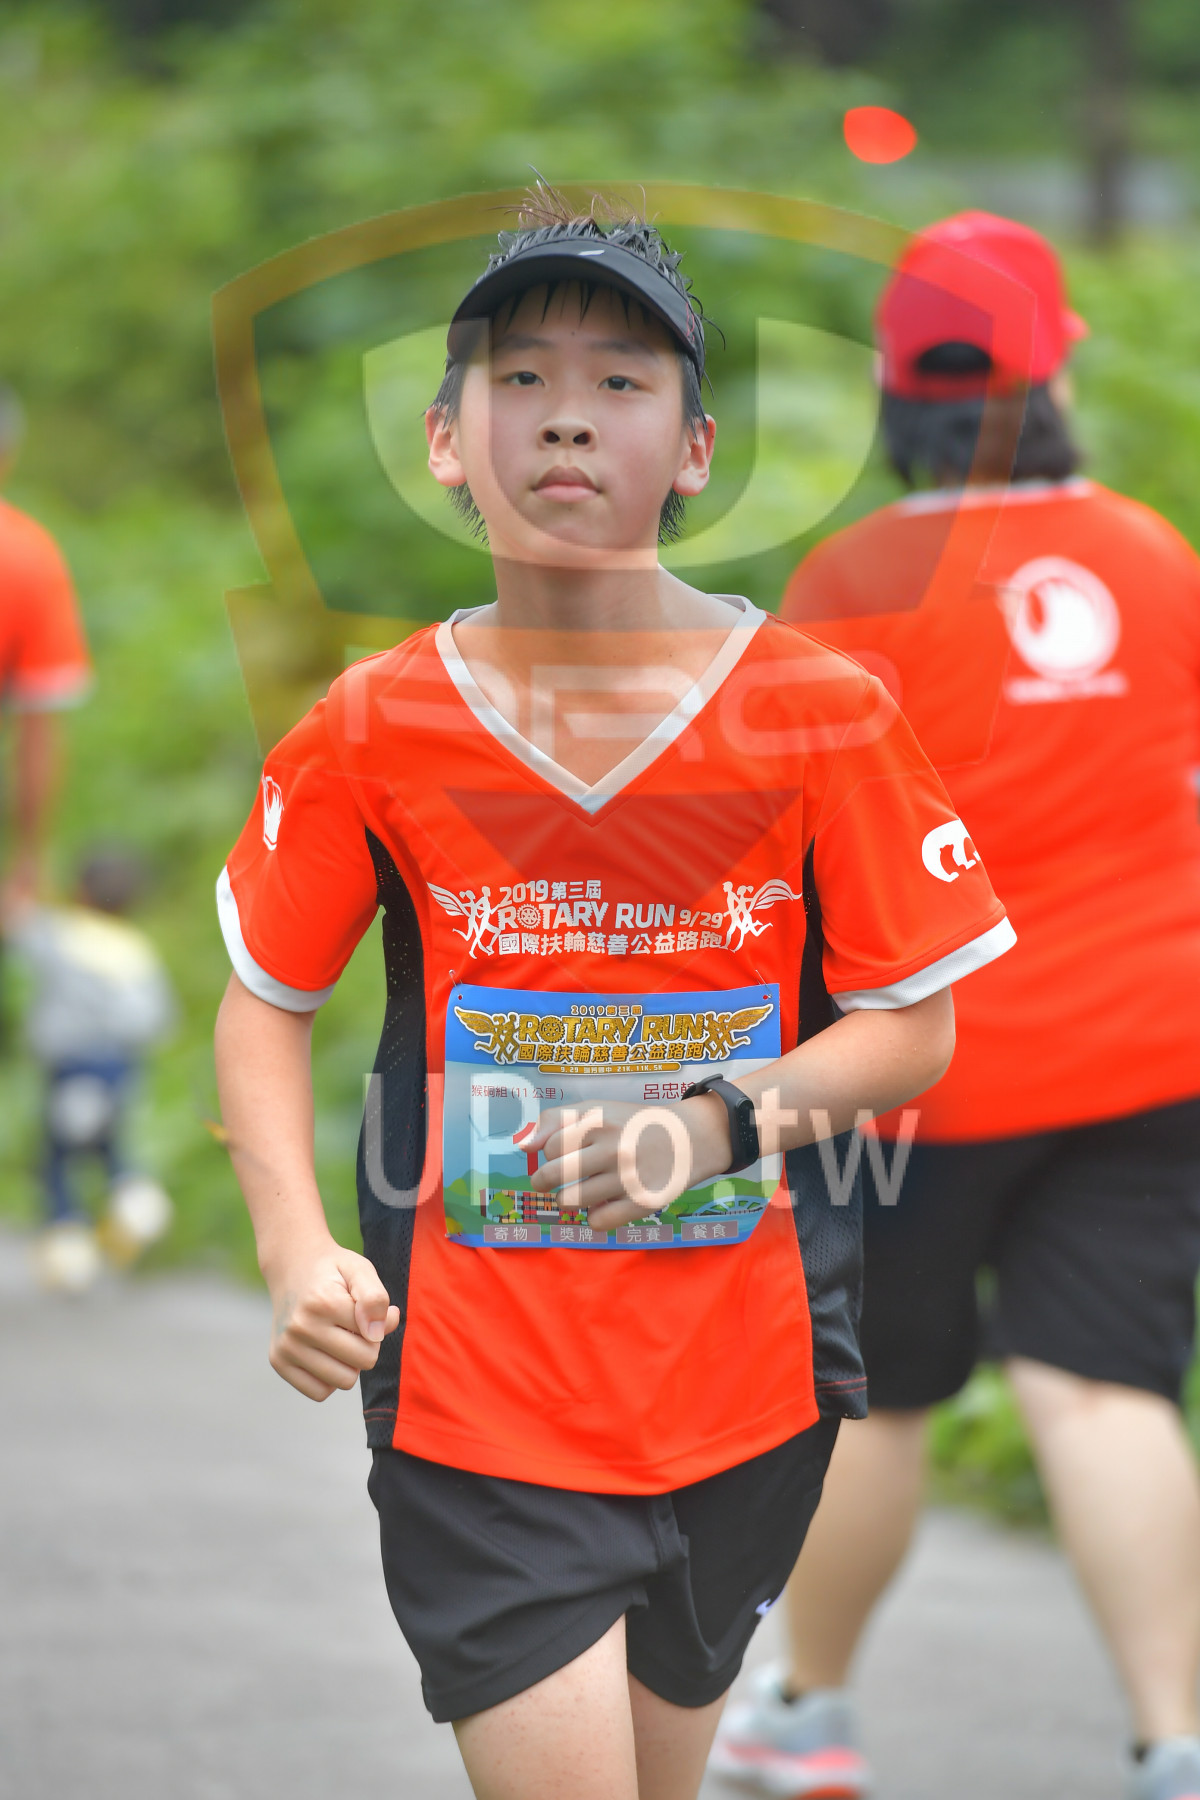 12019,ROTARY RUN 9/29,《」,8000。,EOTRZEAMMe,,(11|